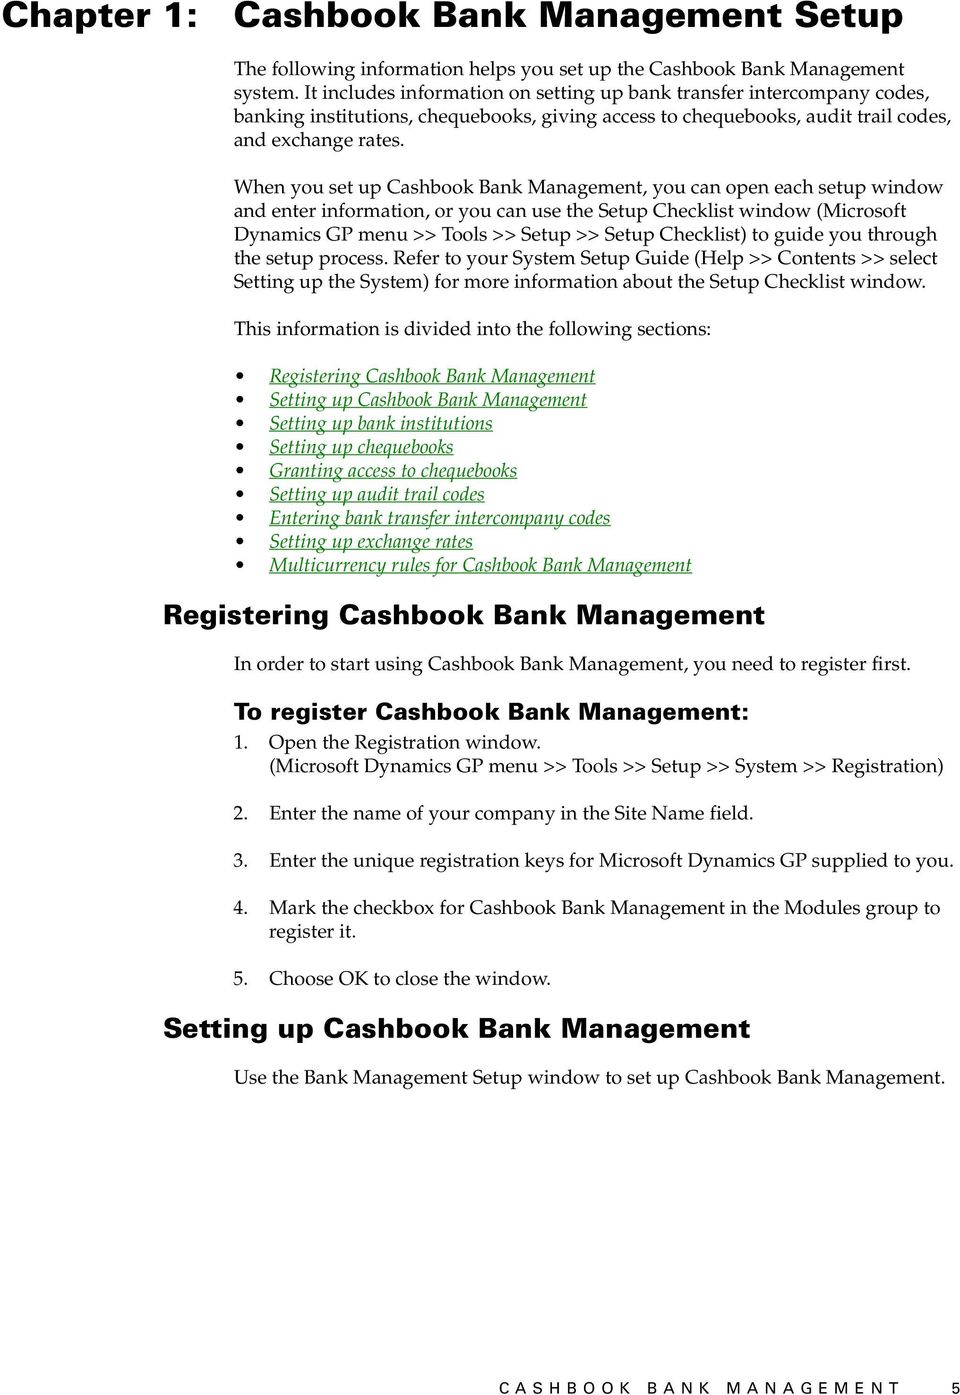 When you set up Cashbook Bank Management, you can open each setup window and enter information, or you can use the Setup Checklist window (Microsoft Dynamics GP menu >> Tools >> Setup >> Setup